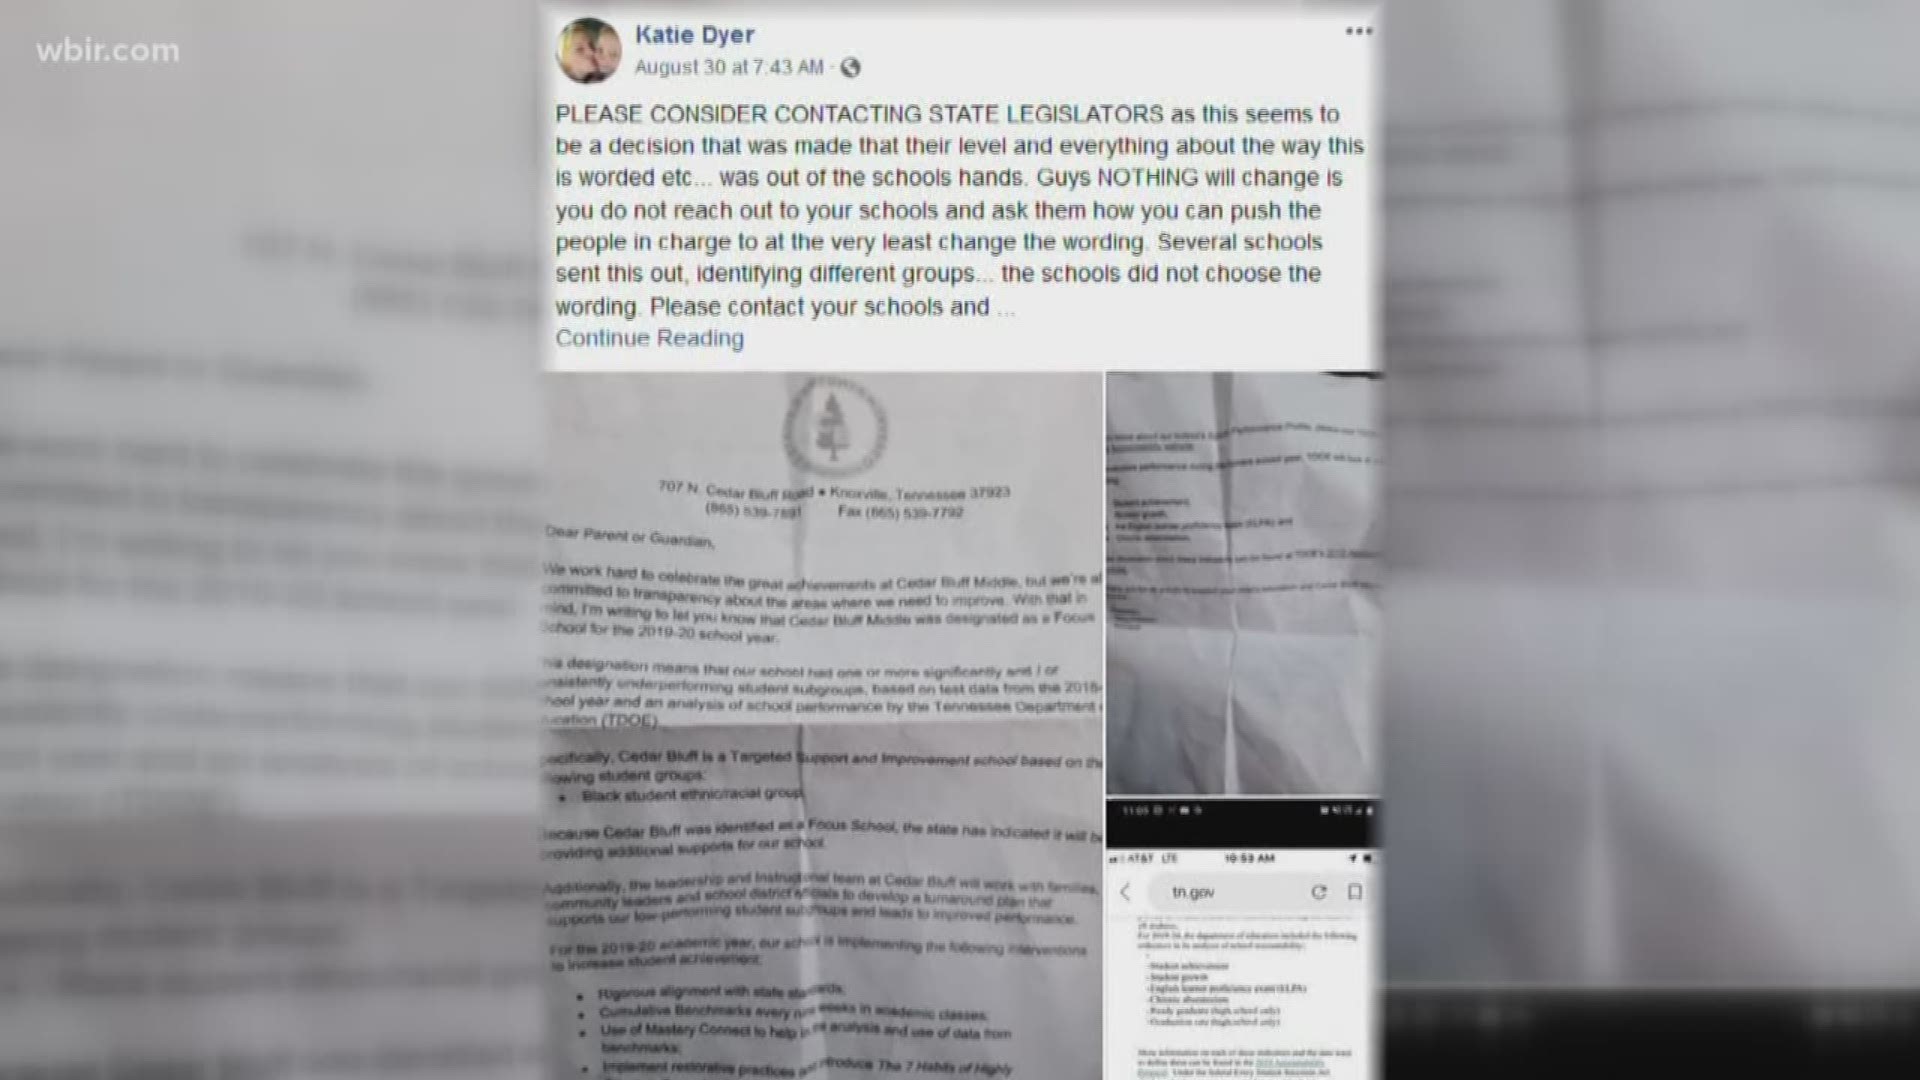 The Tennessee Department of Education says it plans to take a second look at the letter to avoid this from happening in the future. This is an issue being looked at by politicians and advocates both in Memphis and Nashville.